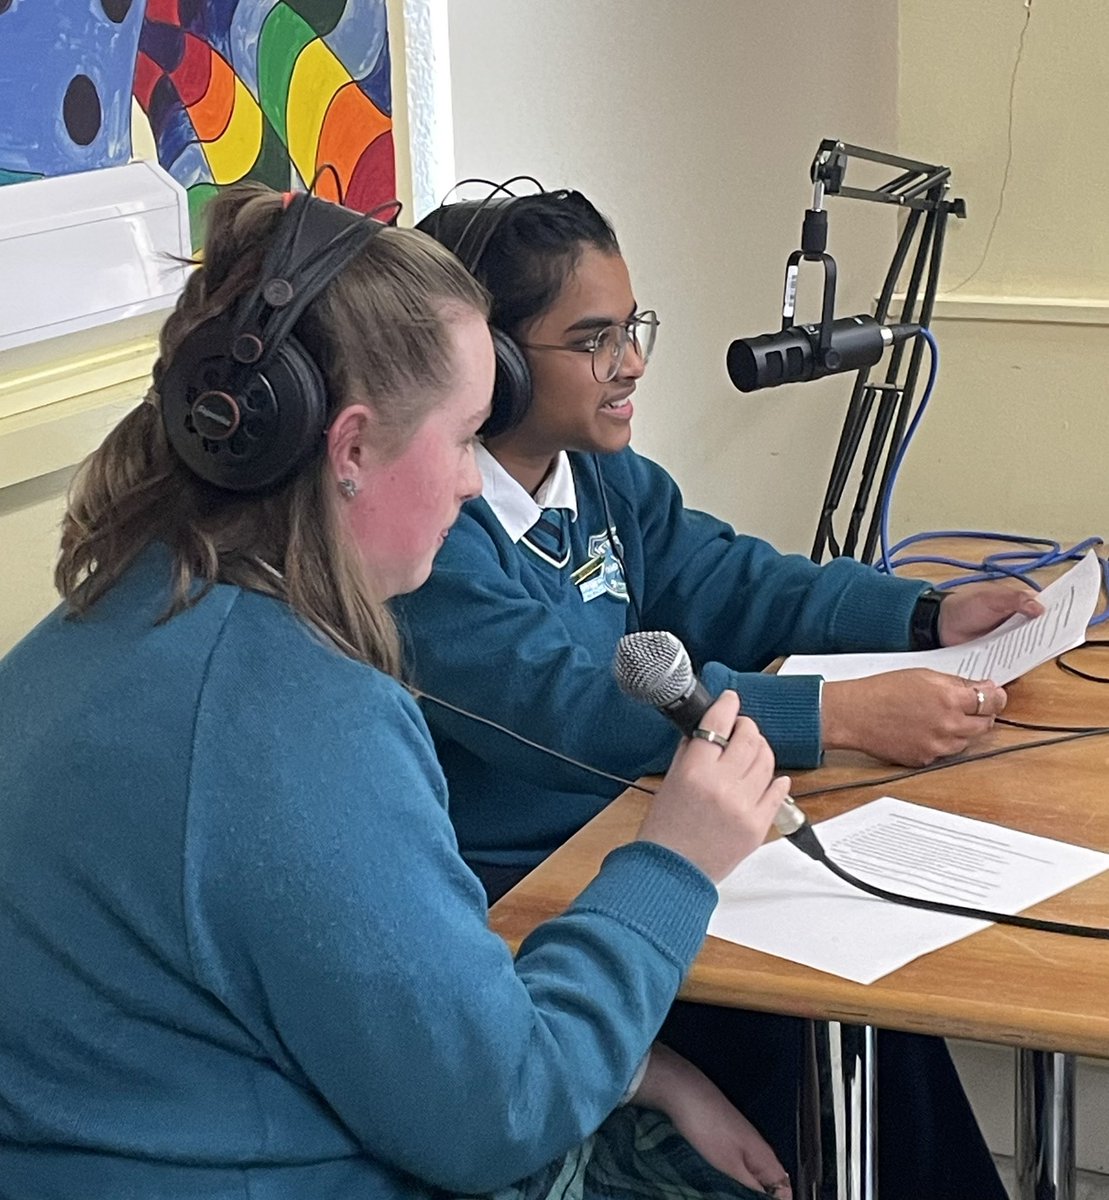 We were delighted to welcome poet @SteverinoD to @stpaulsg today to record an episode of our TY Podcast. A fantastic experience for our students. Thank you Steve, for sharing your insights with us.